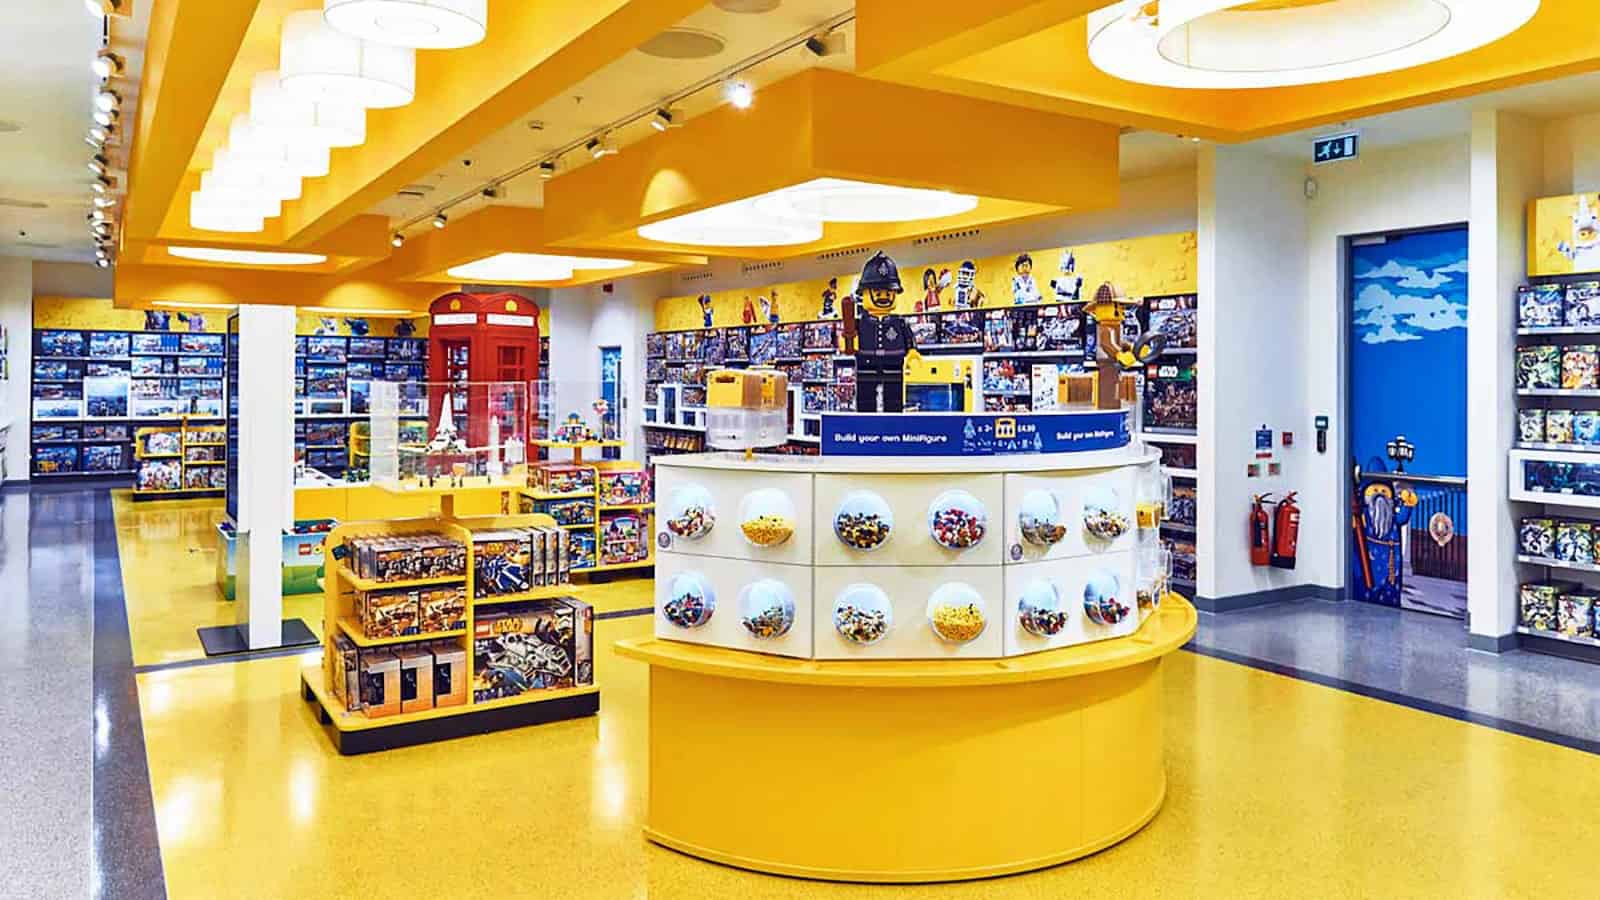 How to Implement Sustainable Retail Design Strategies